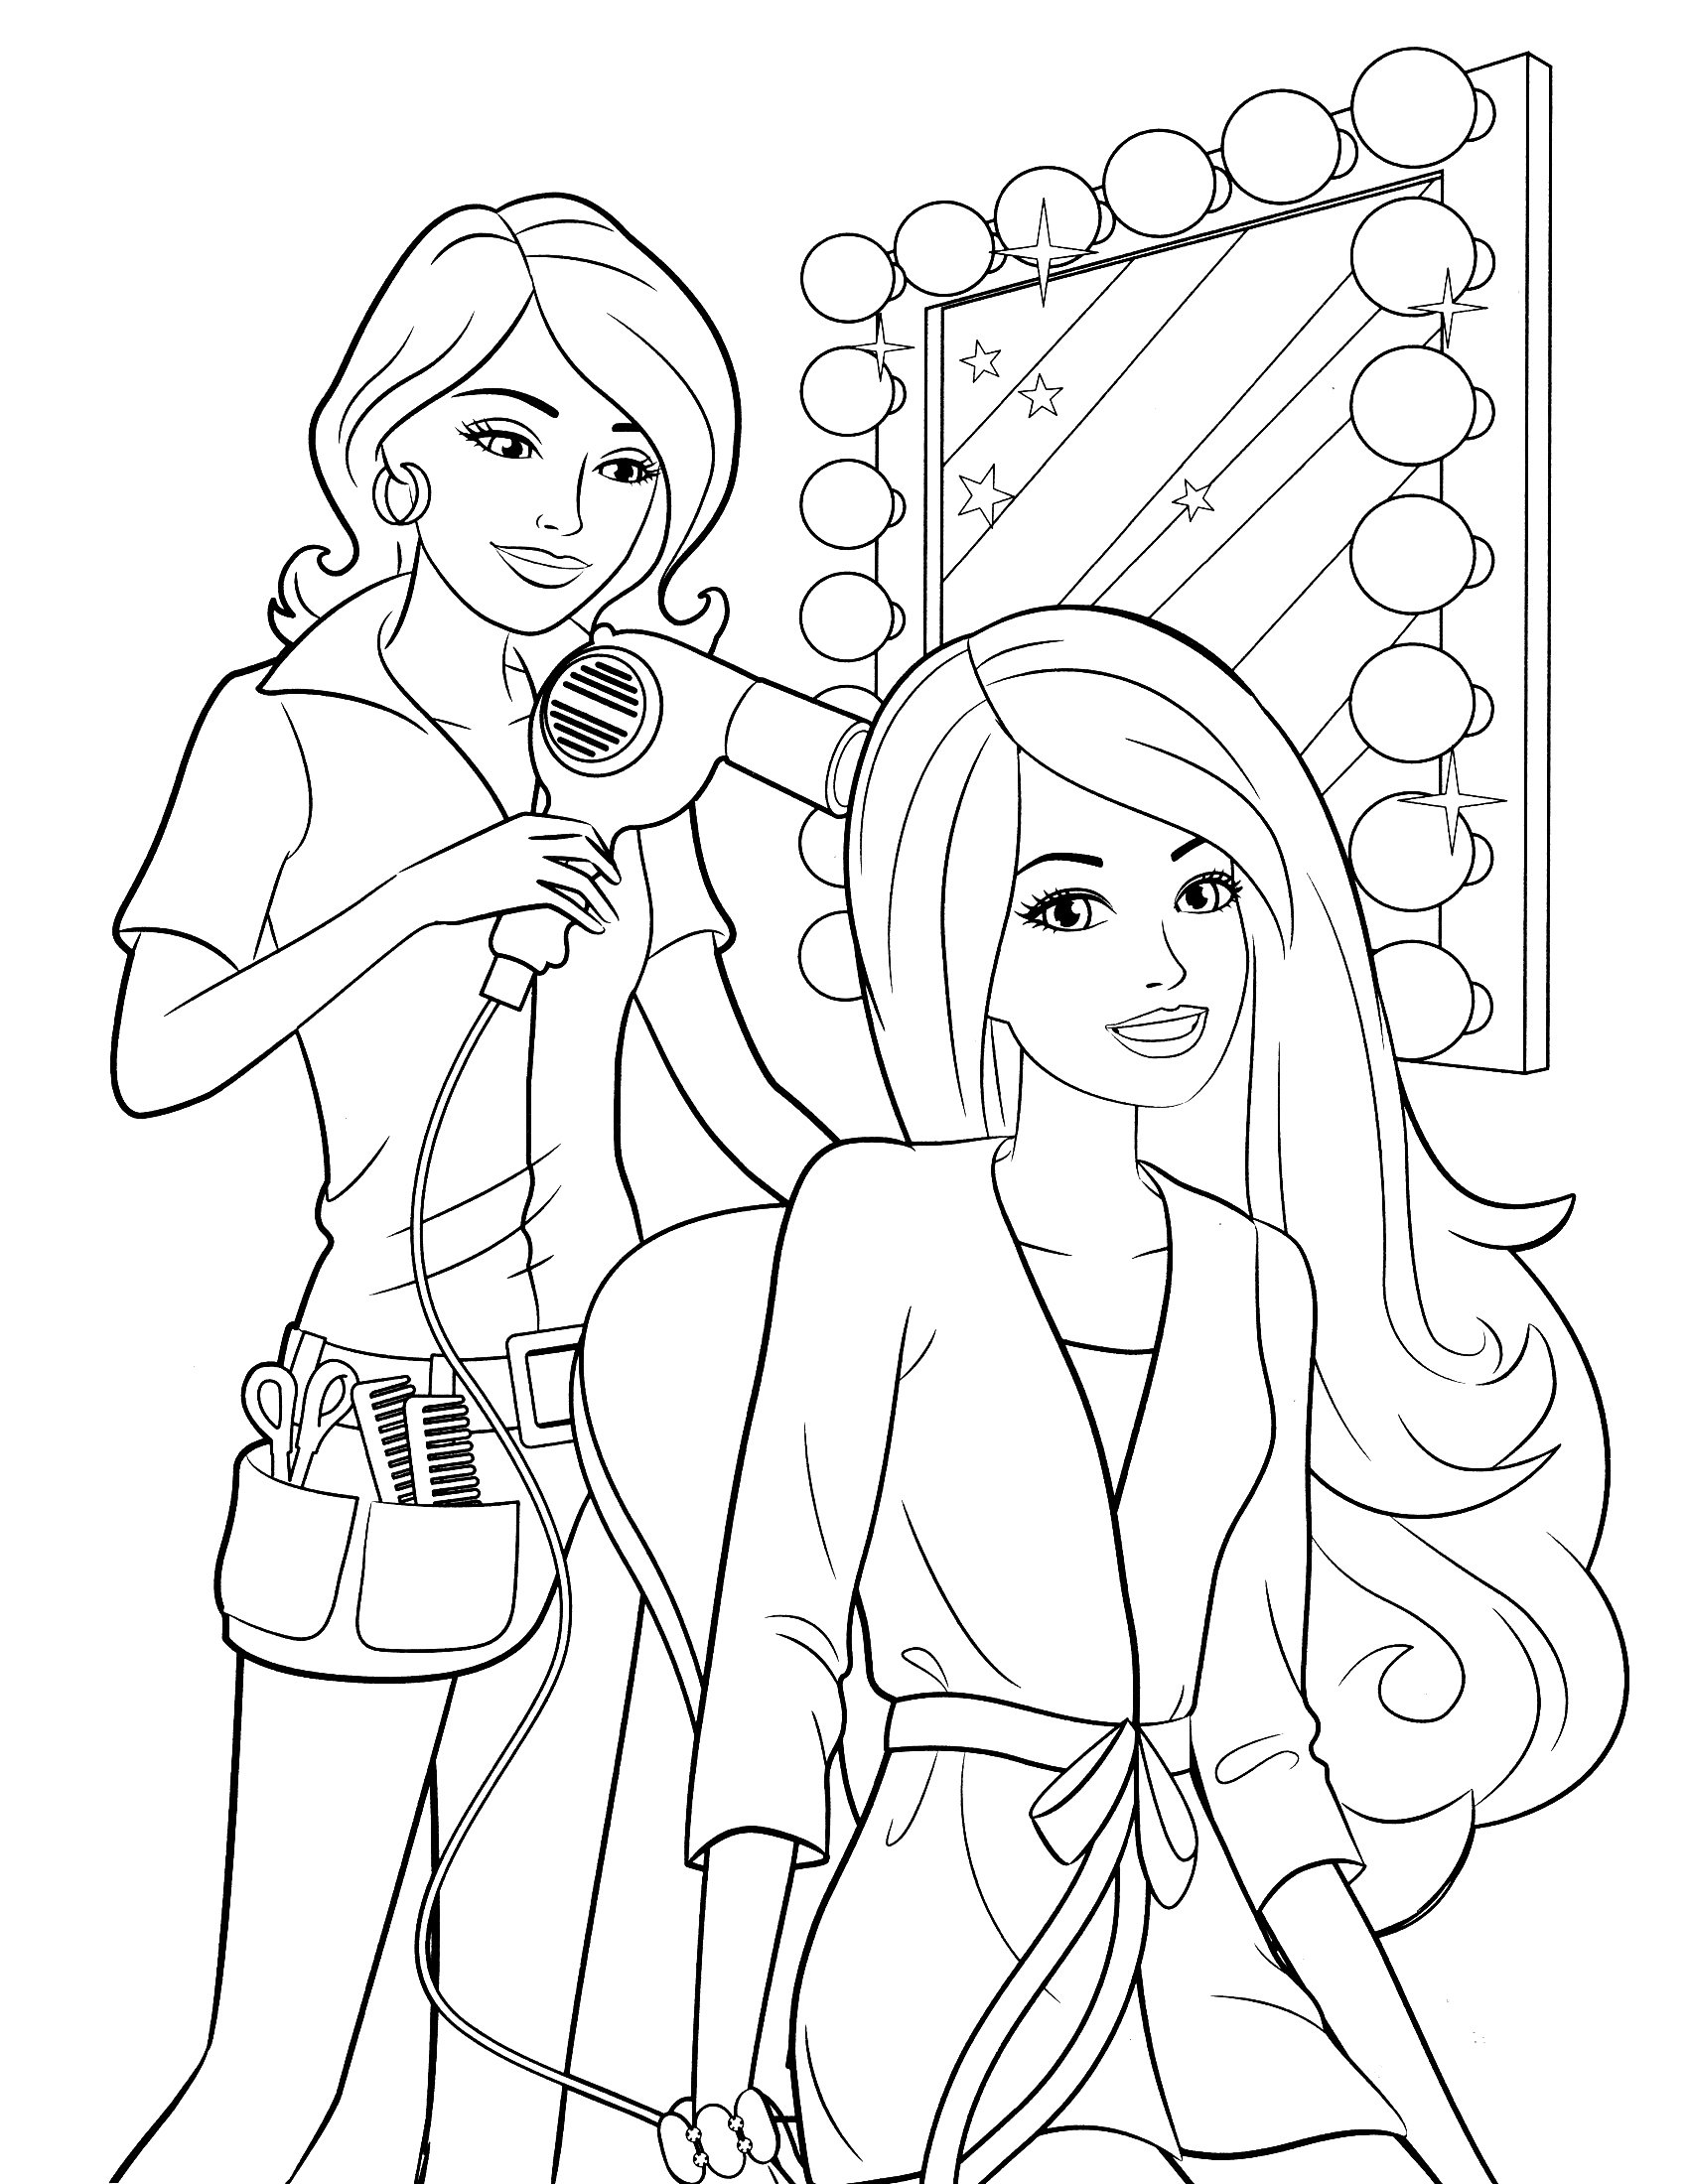 coloring for girls coloring pages for girls best coloring pages for kids coloring for girls 